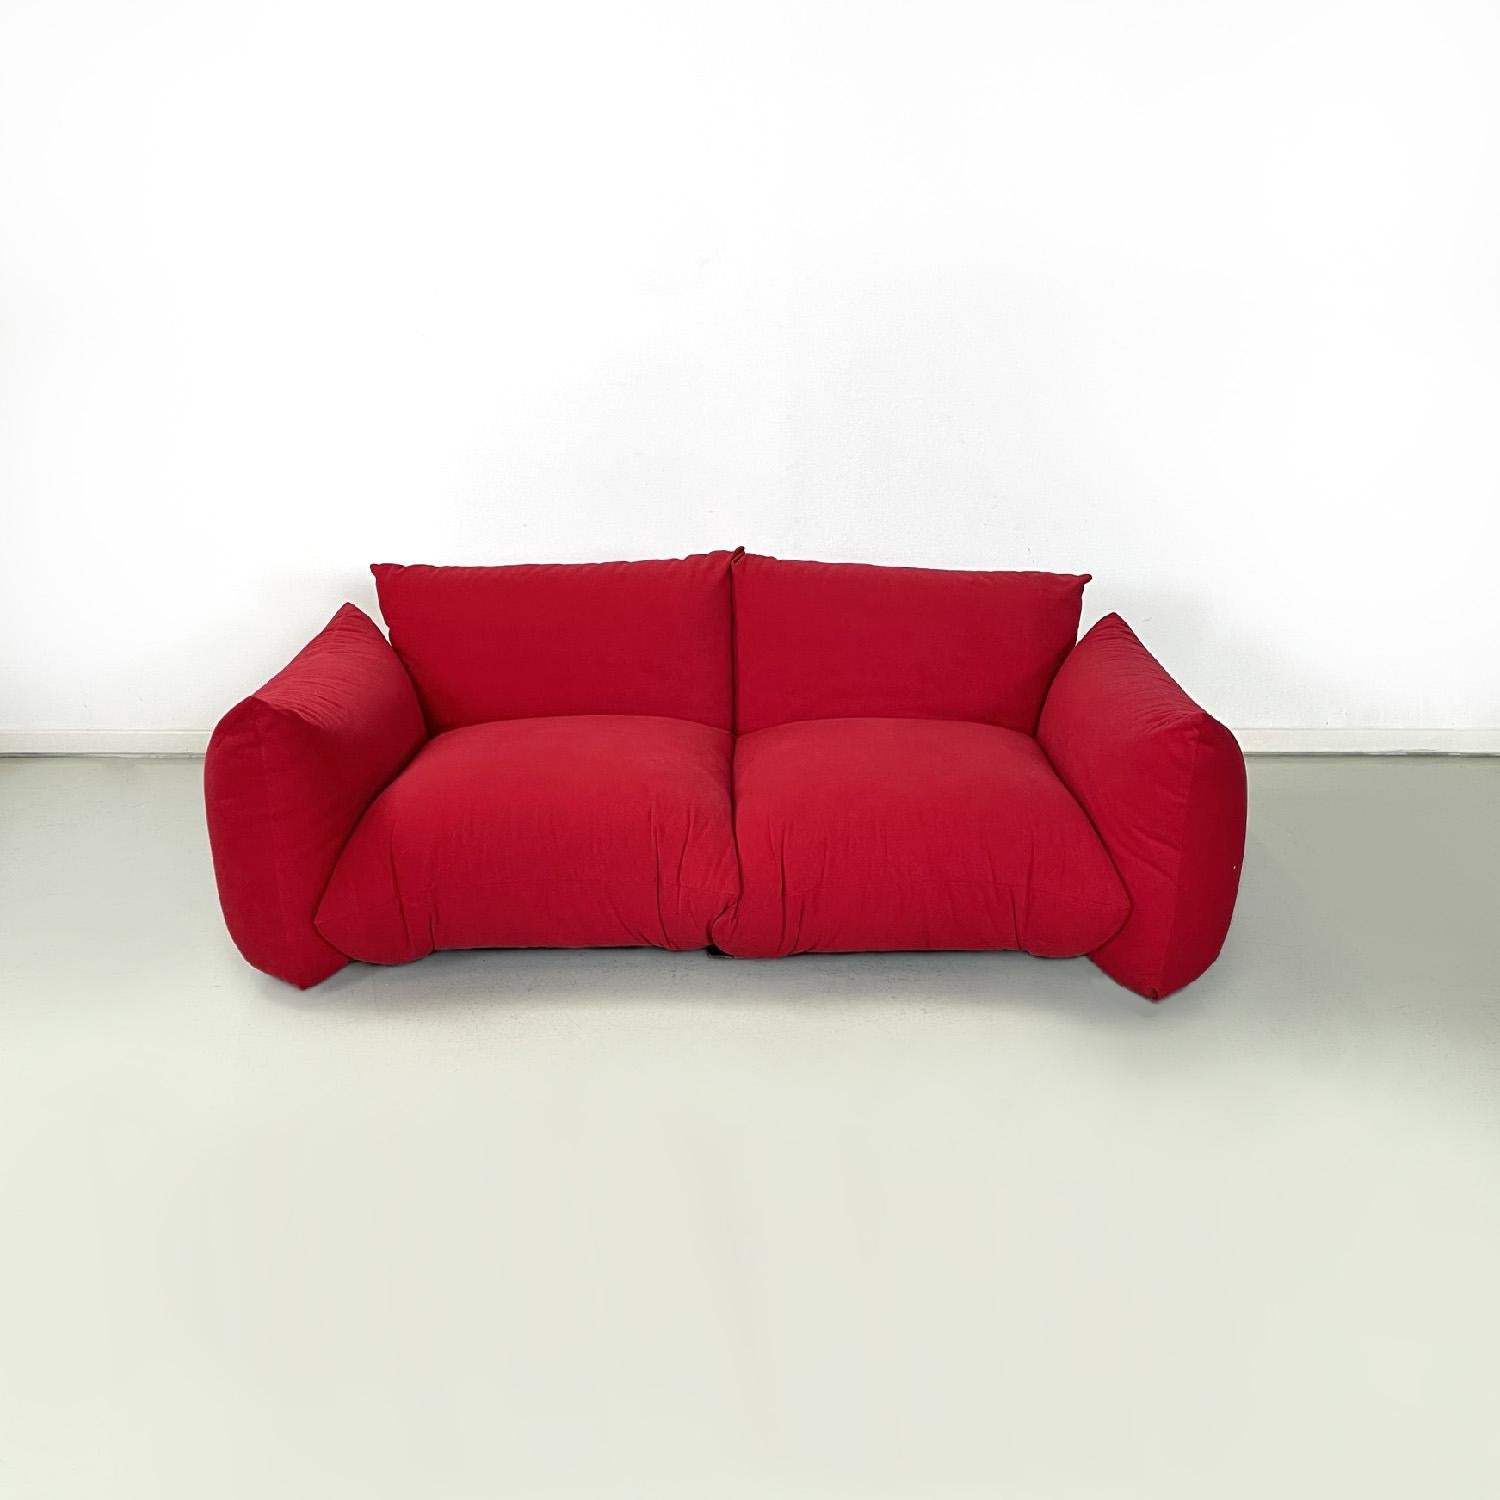 Italian modern red sofas Marenco by Mario Marenco for Arflex, 1970s
Pair of red sofas mod. Marenco. The rectangular seats of the sofas are made up of two padded cushions covered in red alcantara type fabric, as are the backrests. The armrests are